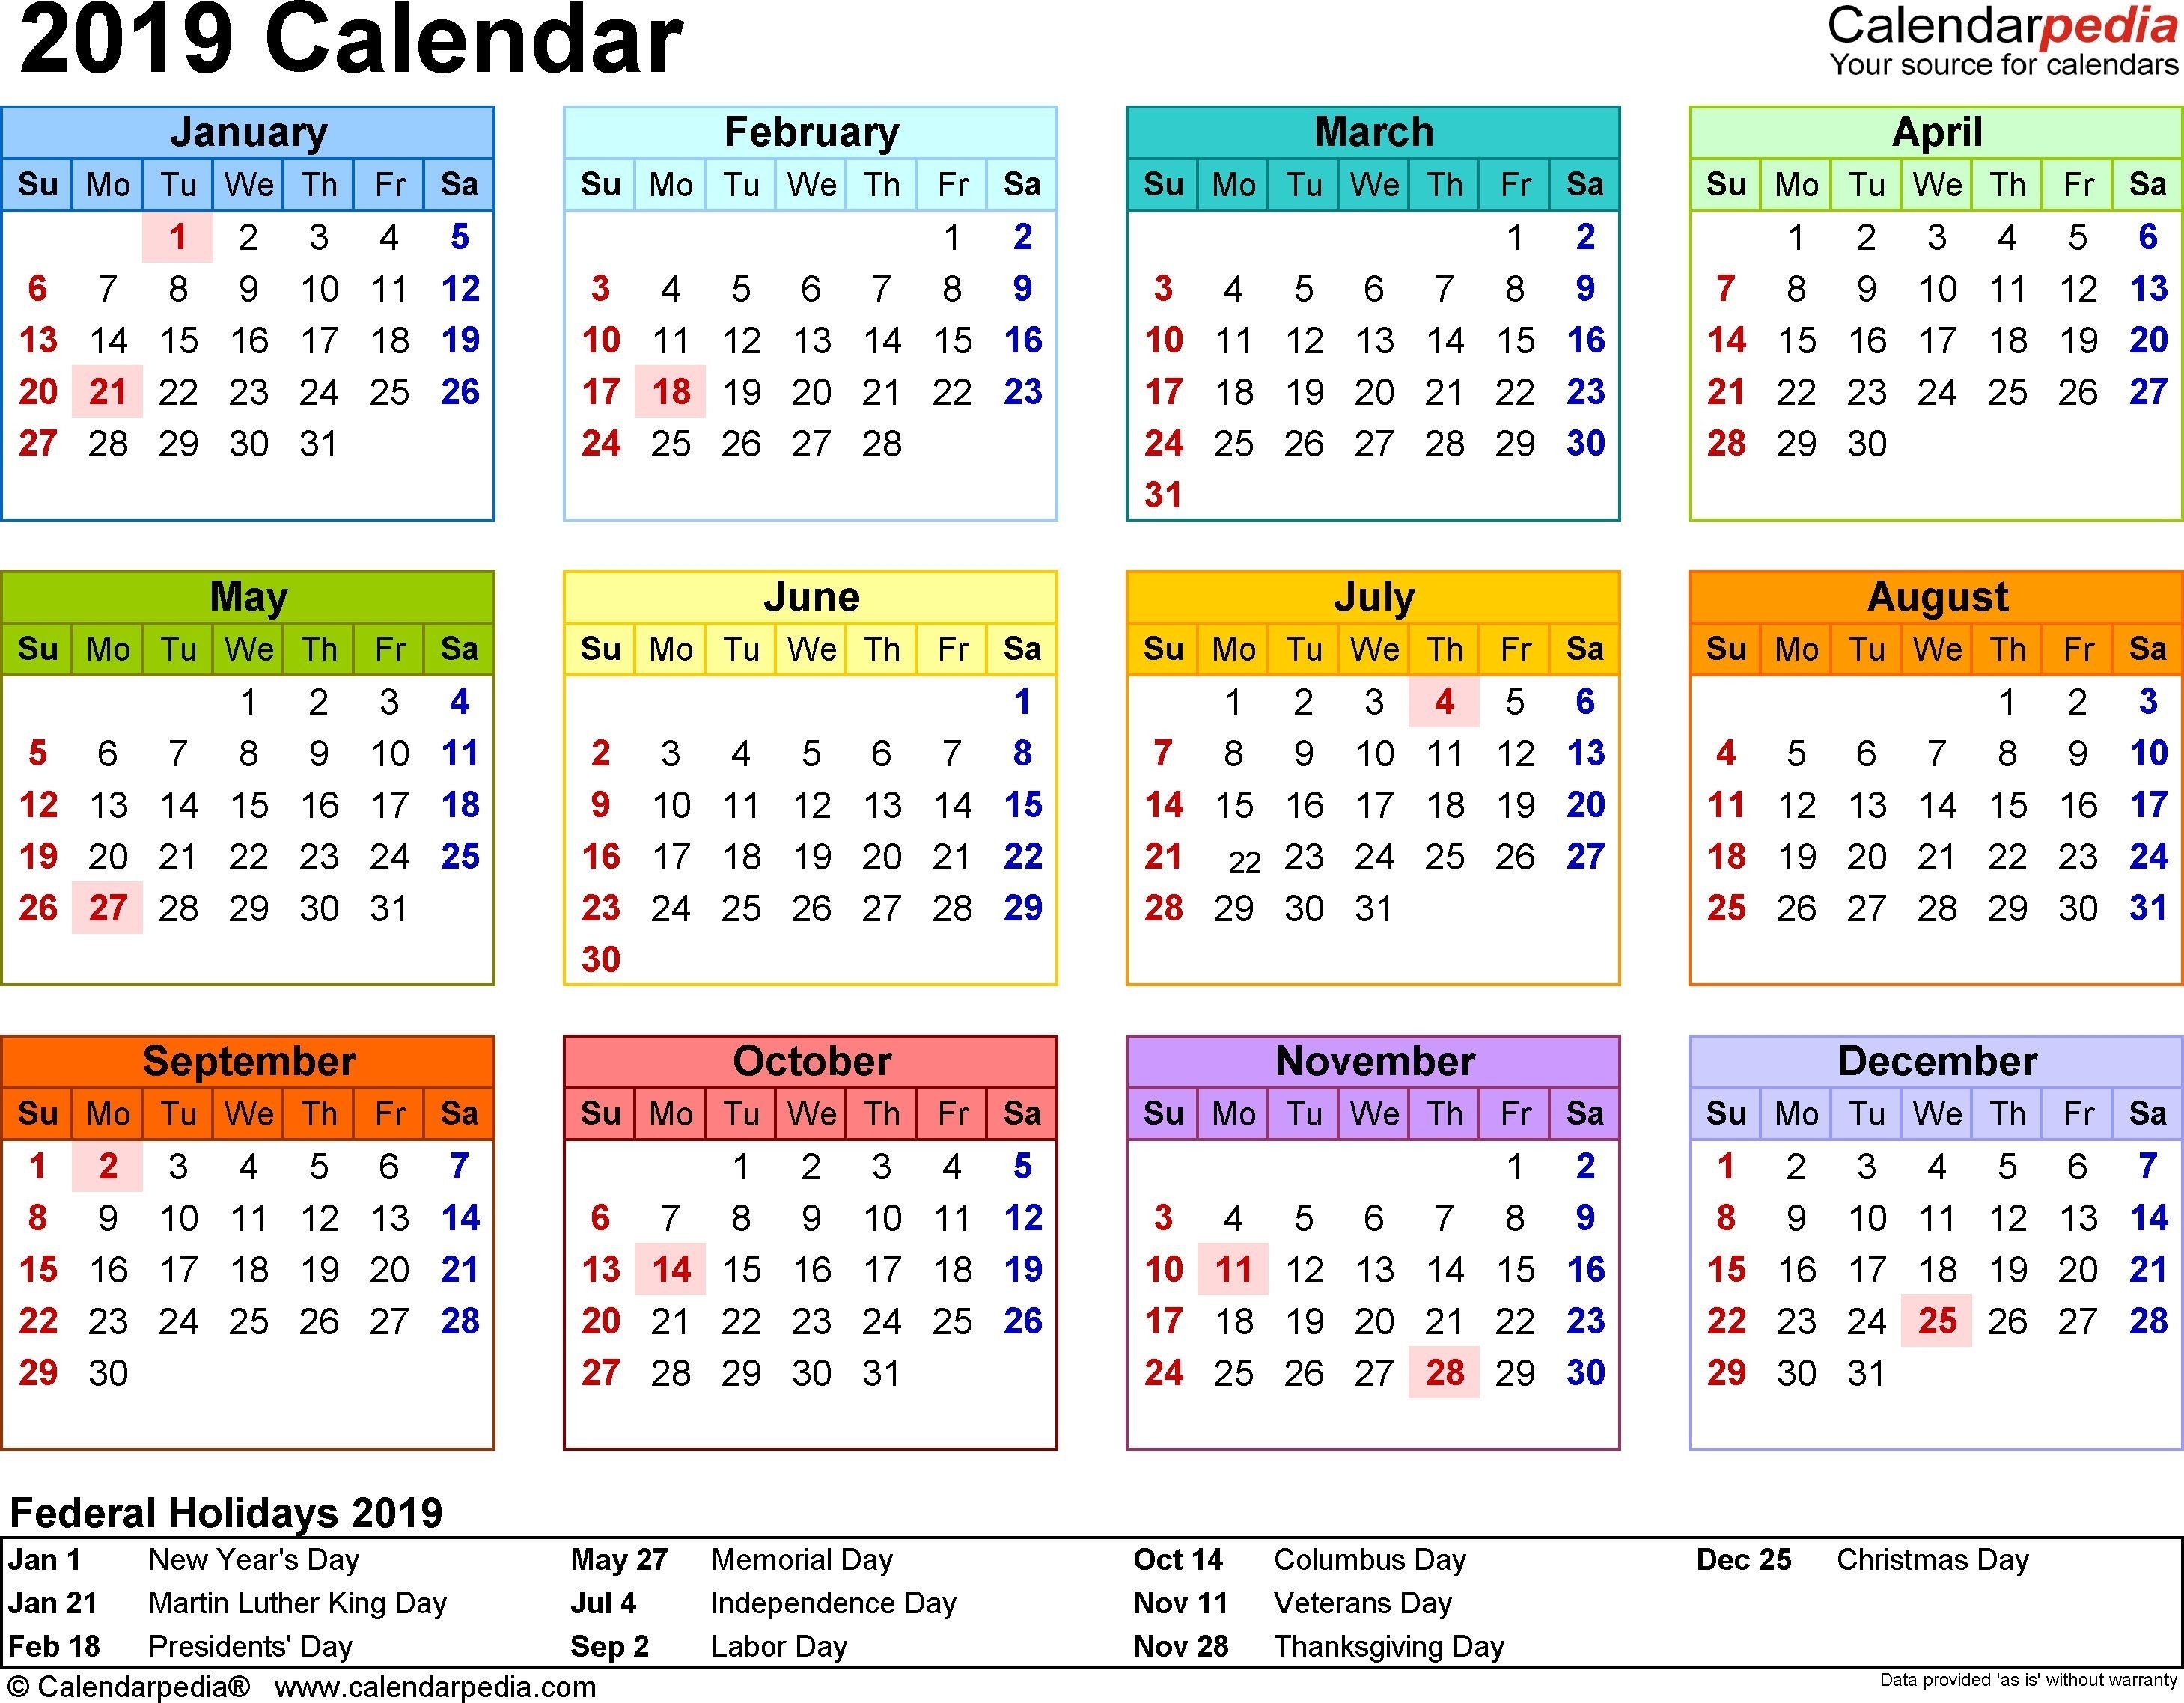 Image Result For Calendar 2019 Holiday Malaysia | Cecilia-2020 Calendar With Holidays Malaysia